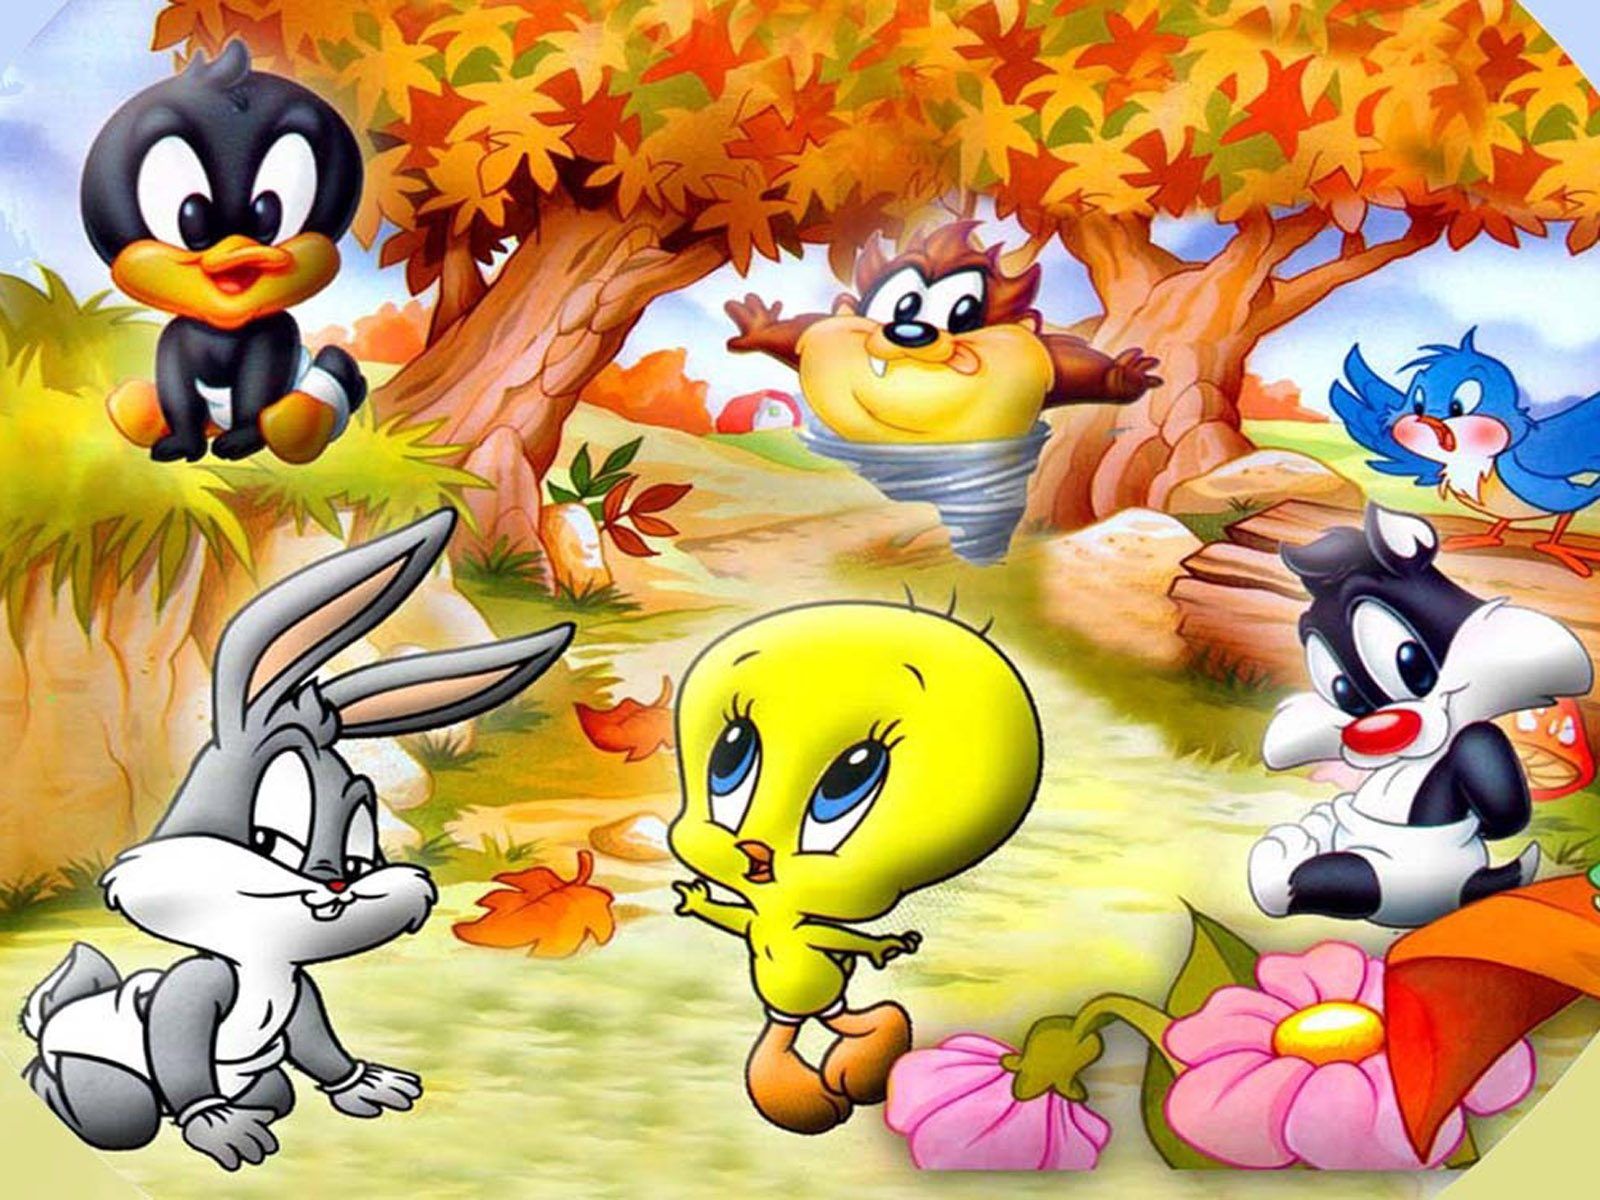 Characters Looney Tunes Baby Tweety Daffy Duck Bugs Bunny Sylvester The Cat And Tasmanian Devil Full HD Wallpaper 1920x1200, Wallpaper13.com